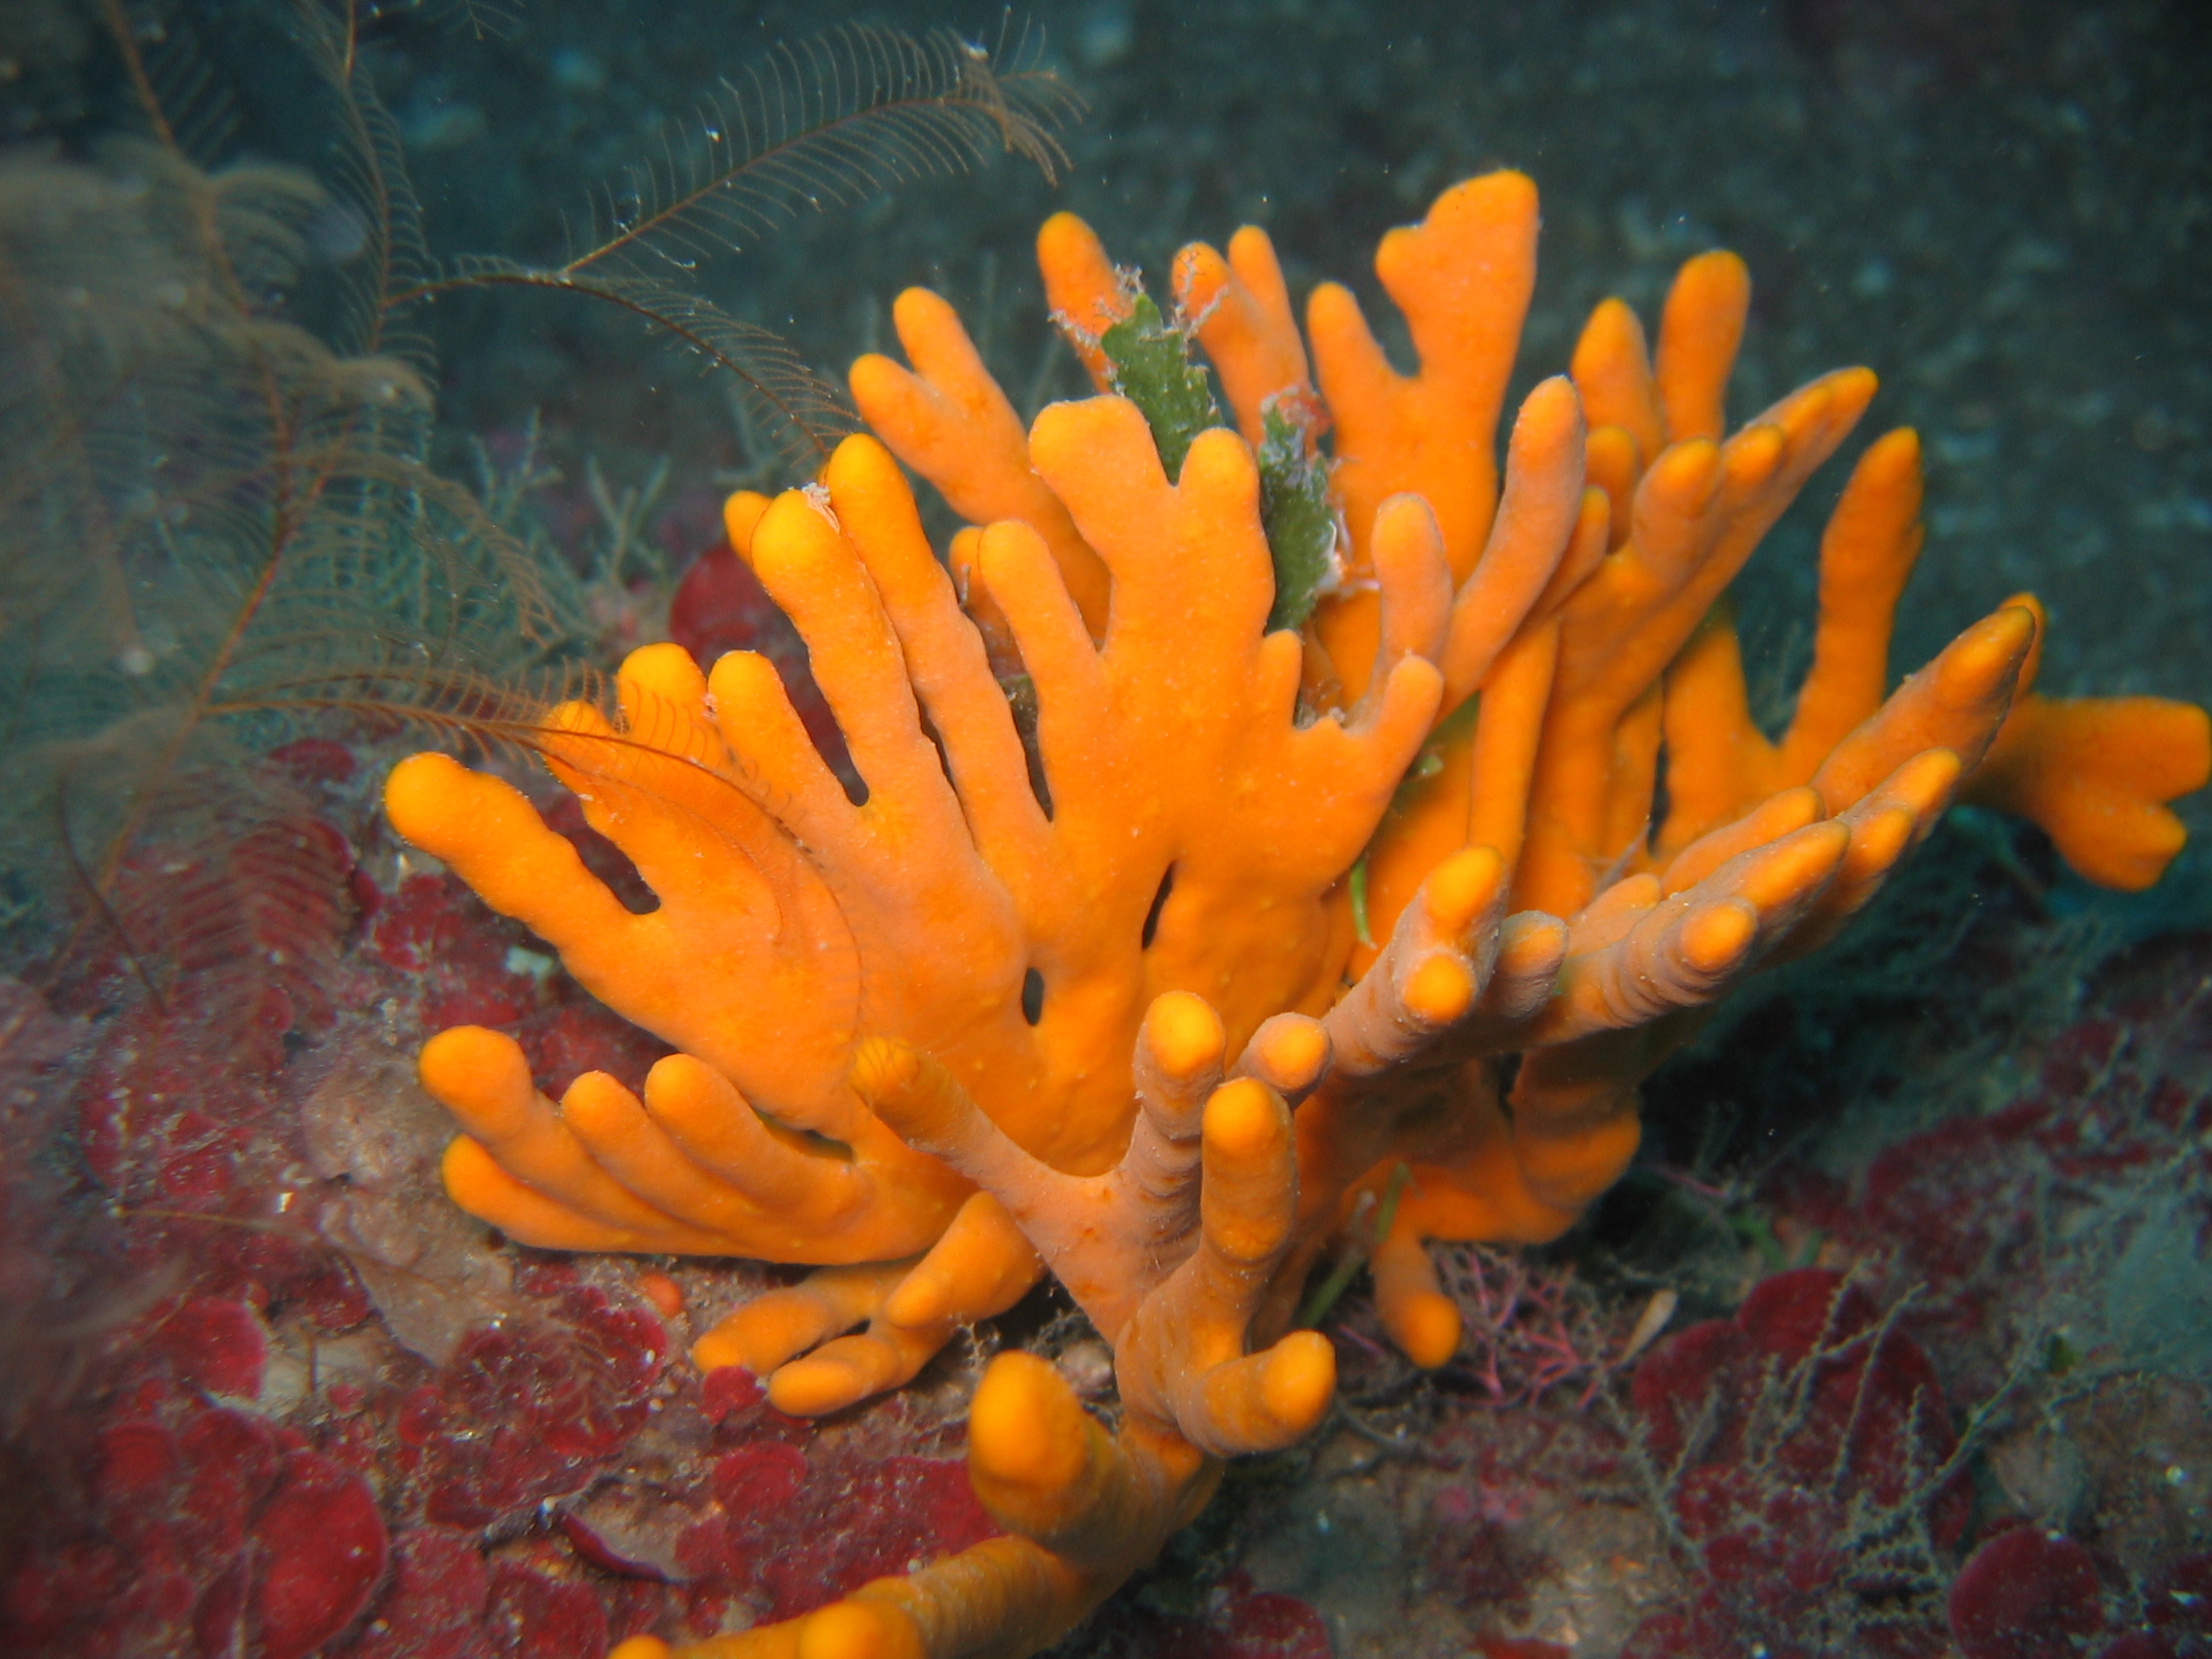 How are sponges collected from the ocean?